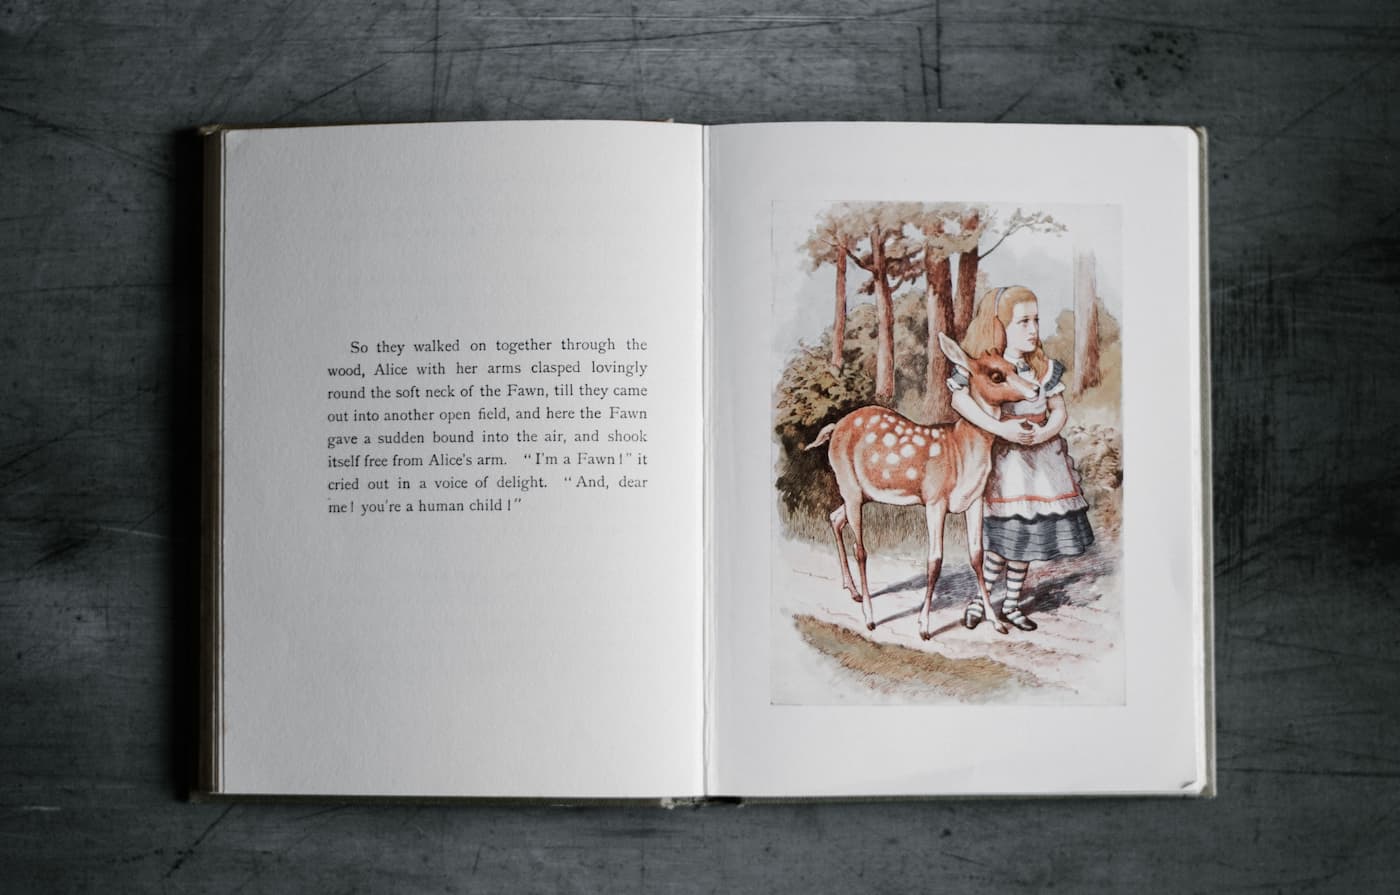 Lewis Carroll's famous alice in wonderland book